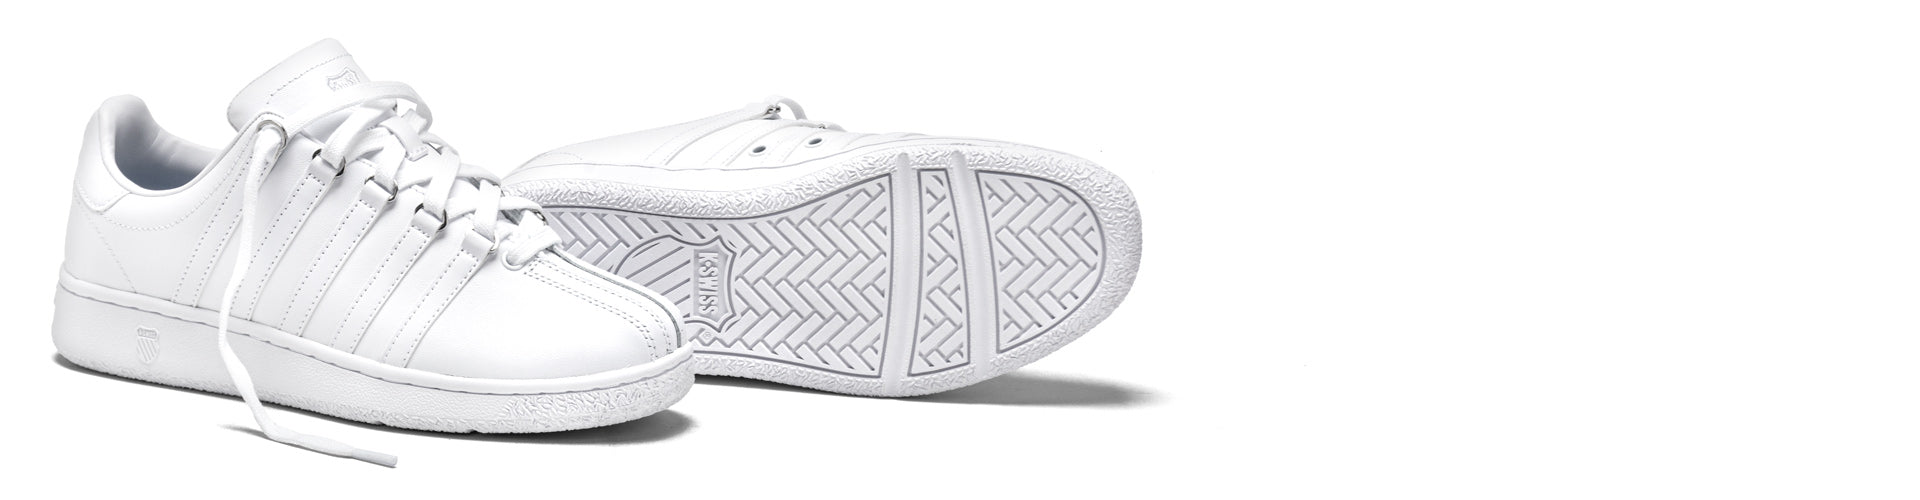 k-swiss tennis shoes on white background